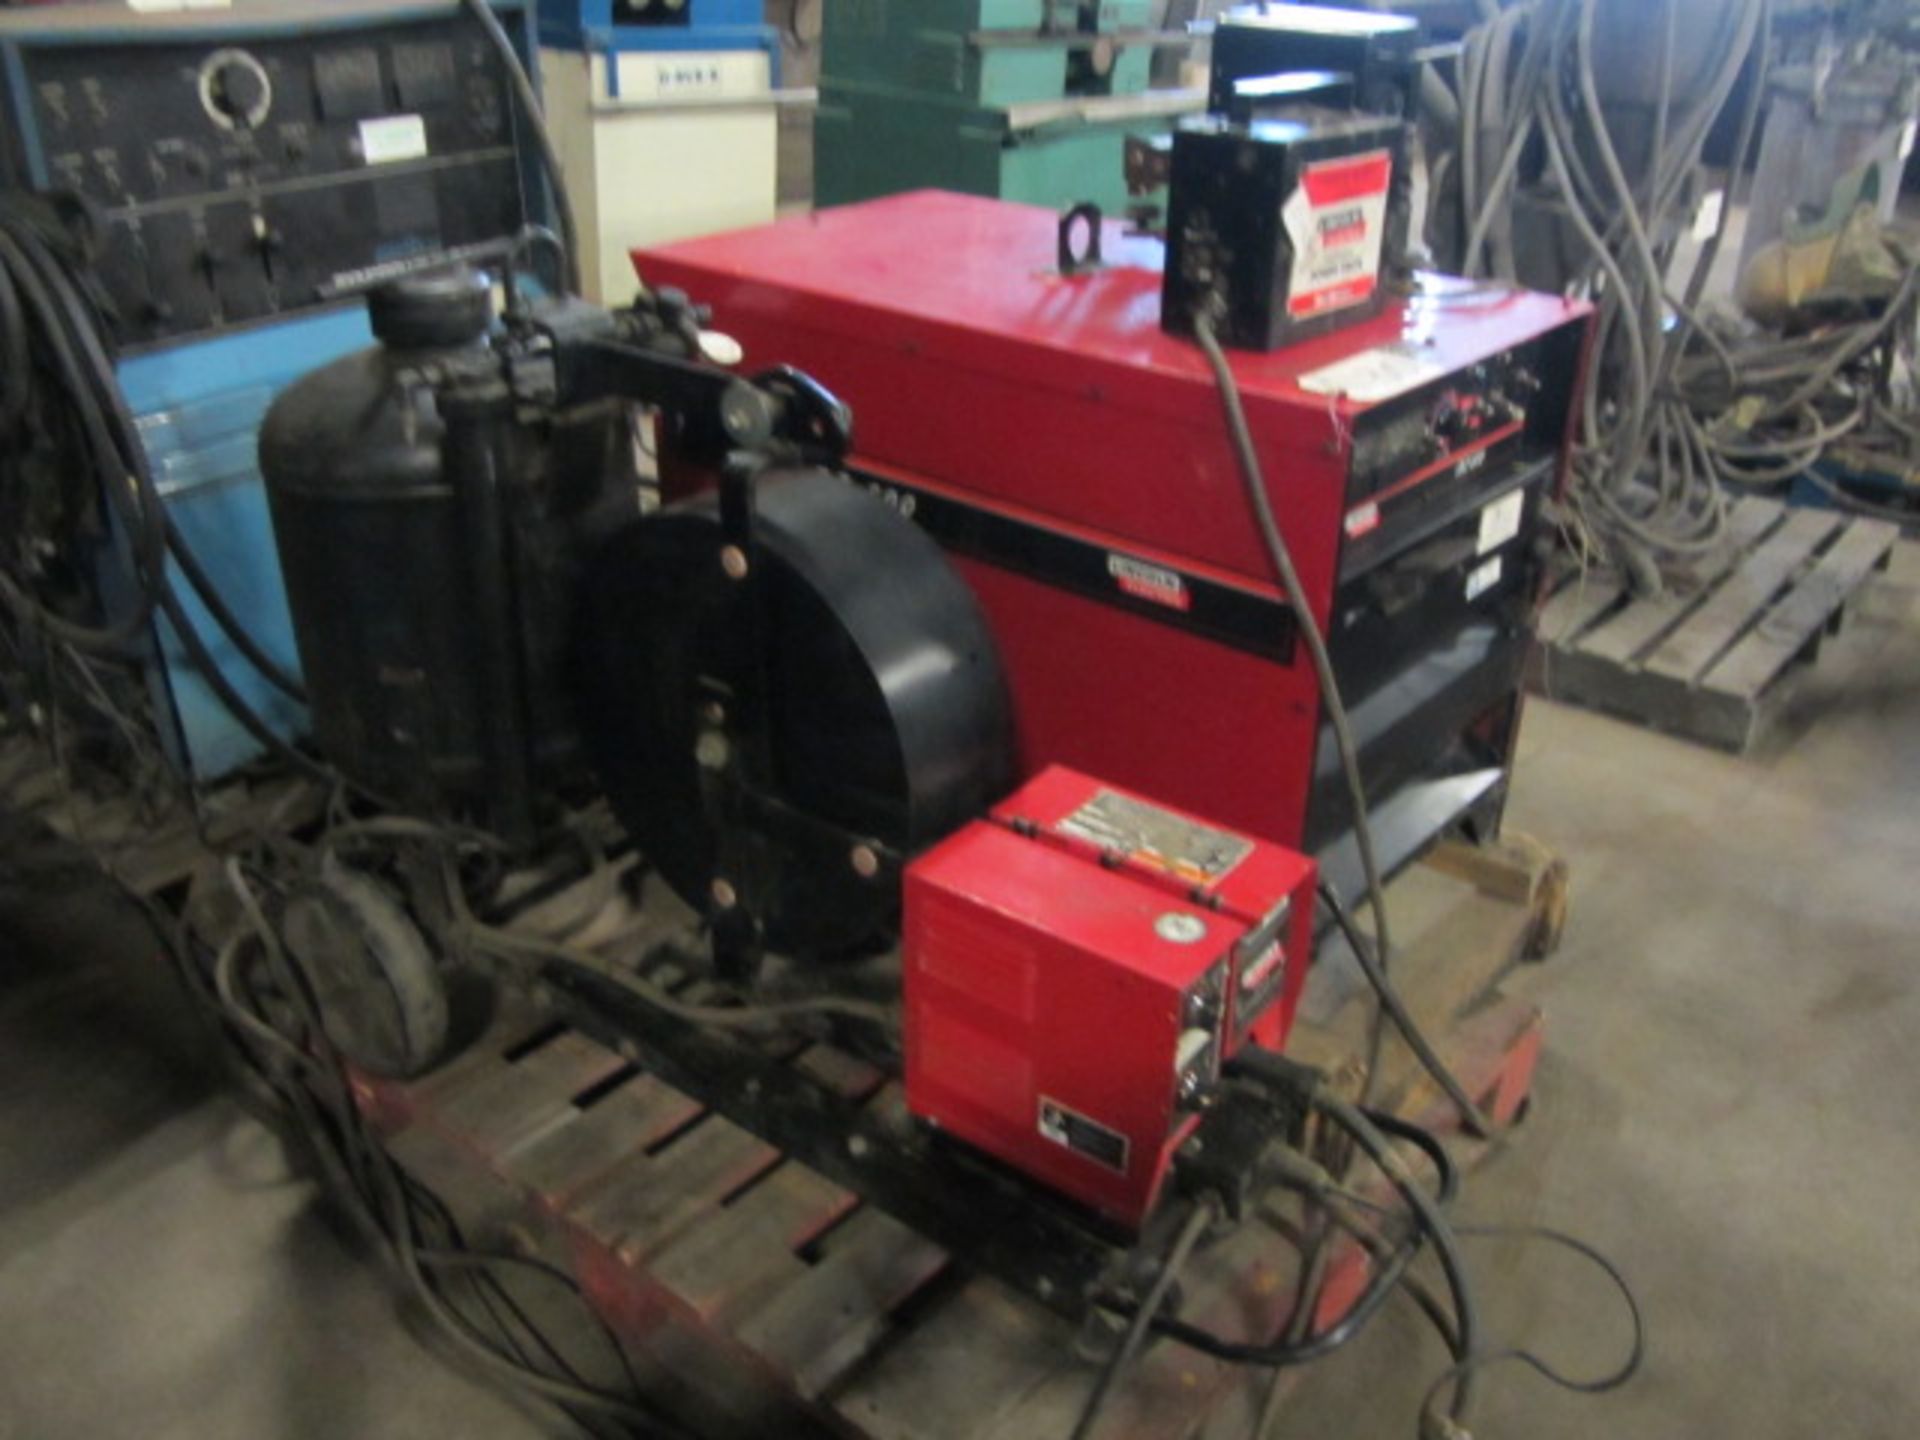 Lincoln DC600 Welder with LN-8 Multi-Process Wire Feeder, Flux Pot on Portable Cart, sn:U1070811579 - Image 3 of 4